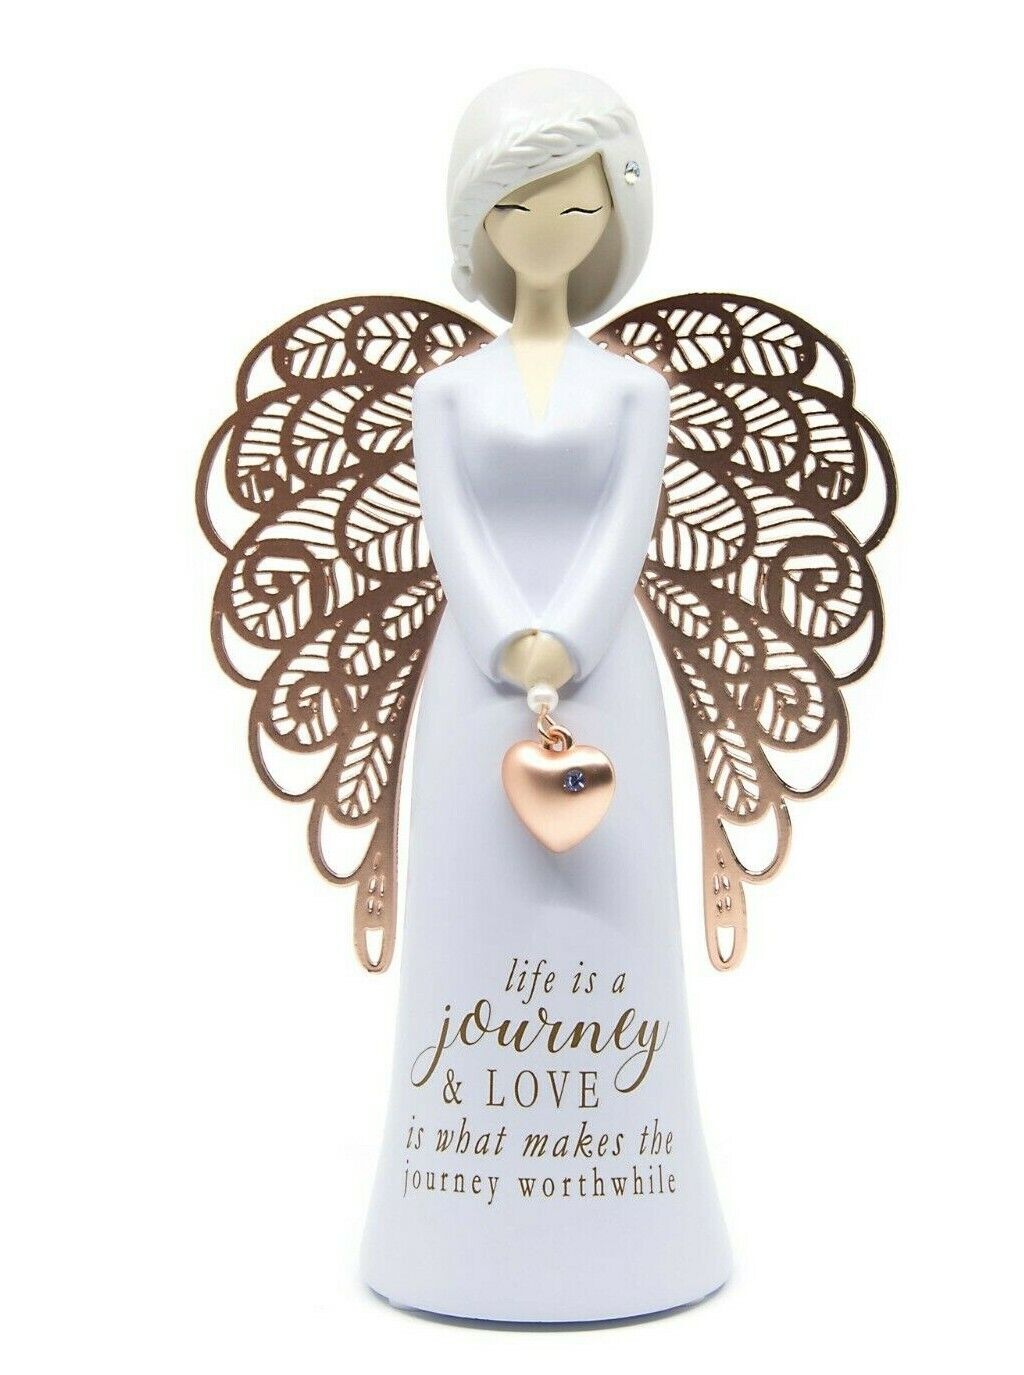 LIFE IS A JOURNEY AND LOVE FIGURINE YOU ARE AN ANGEL new baby memorial wedding